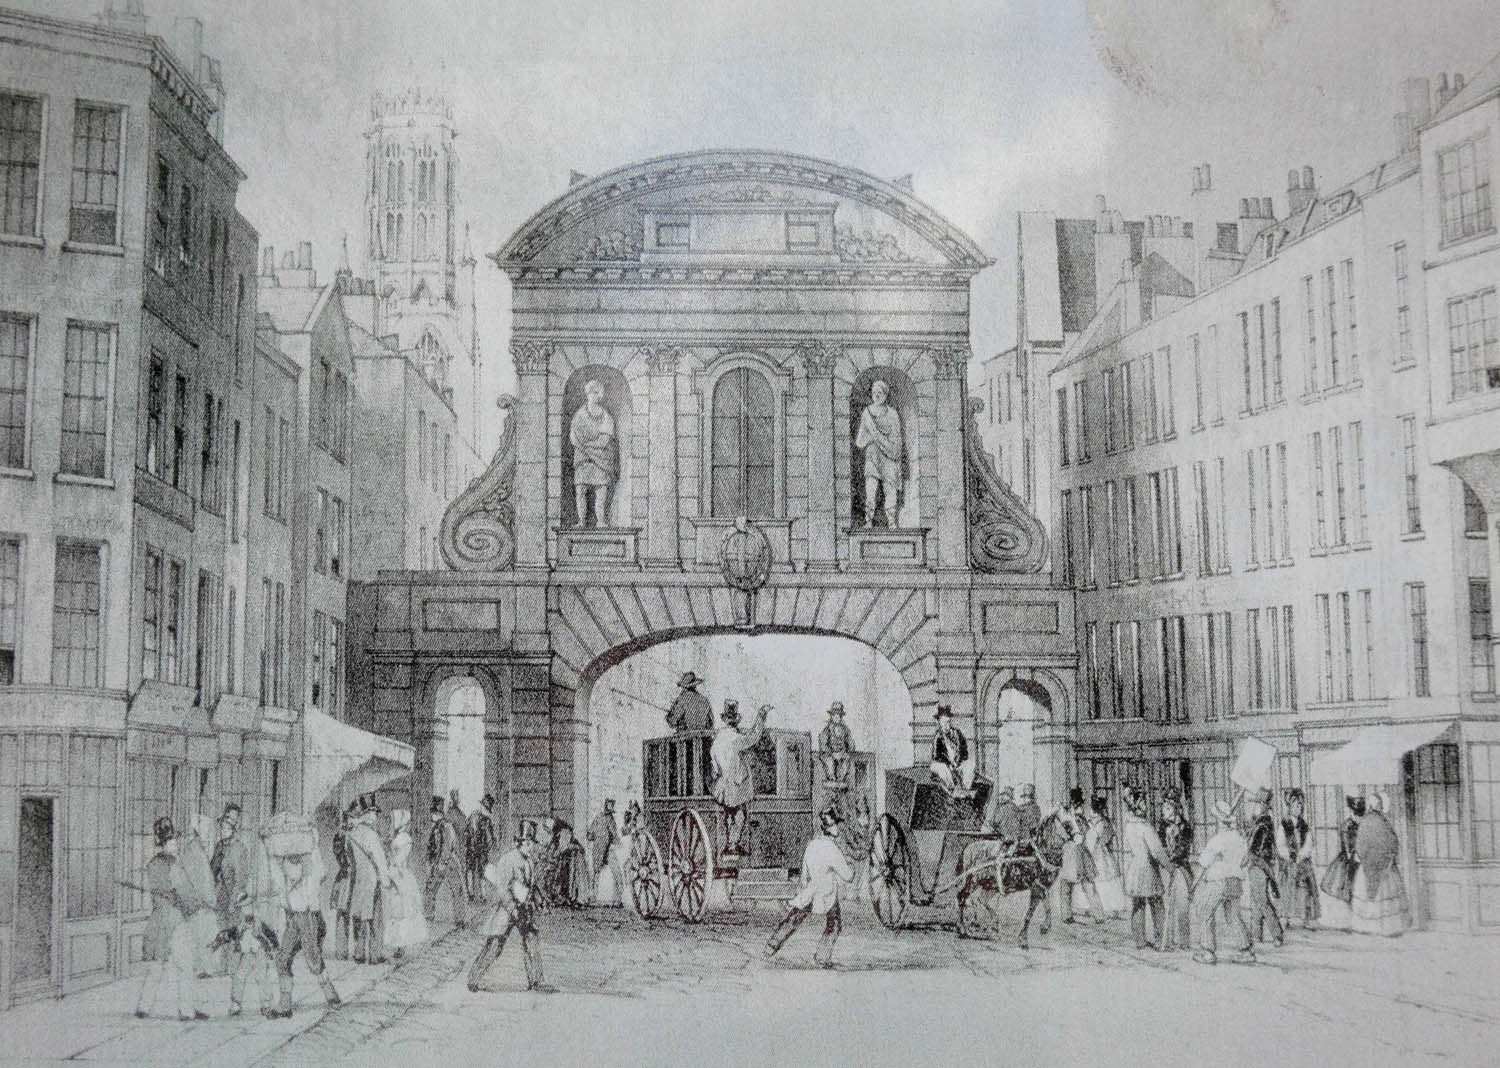 view of Temple Bar in 1845